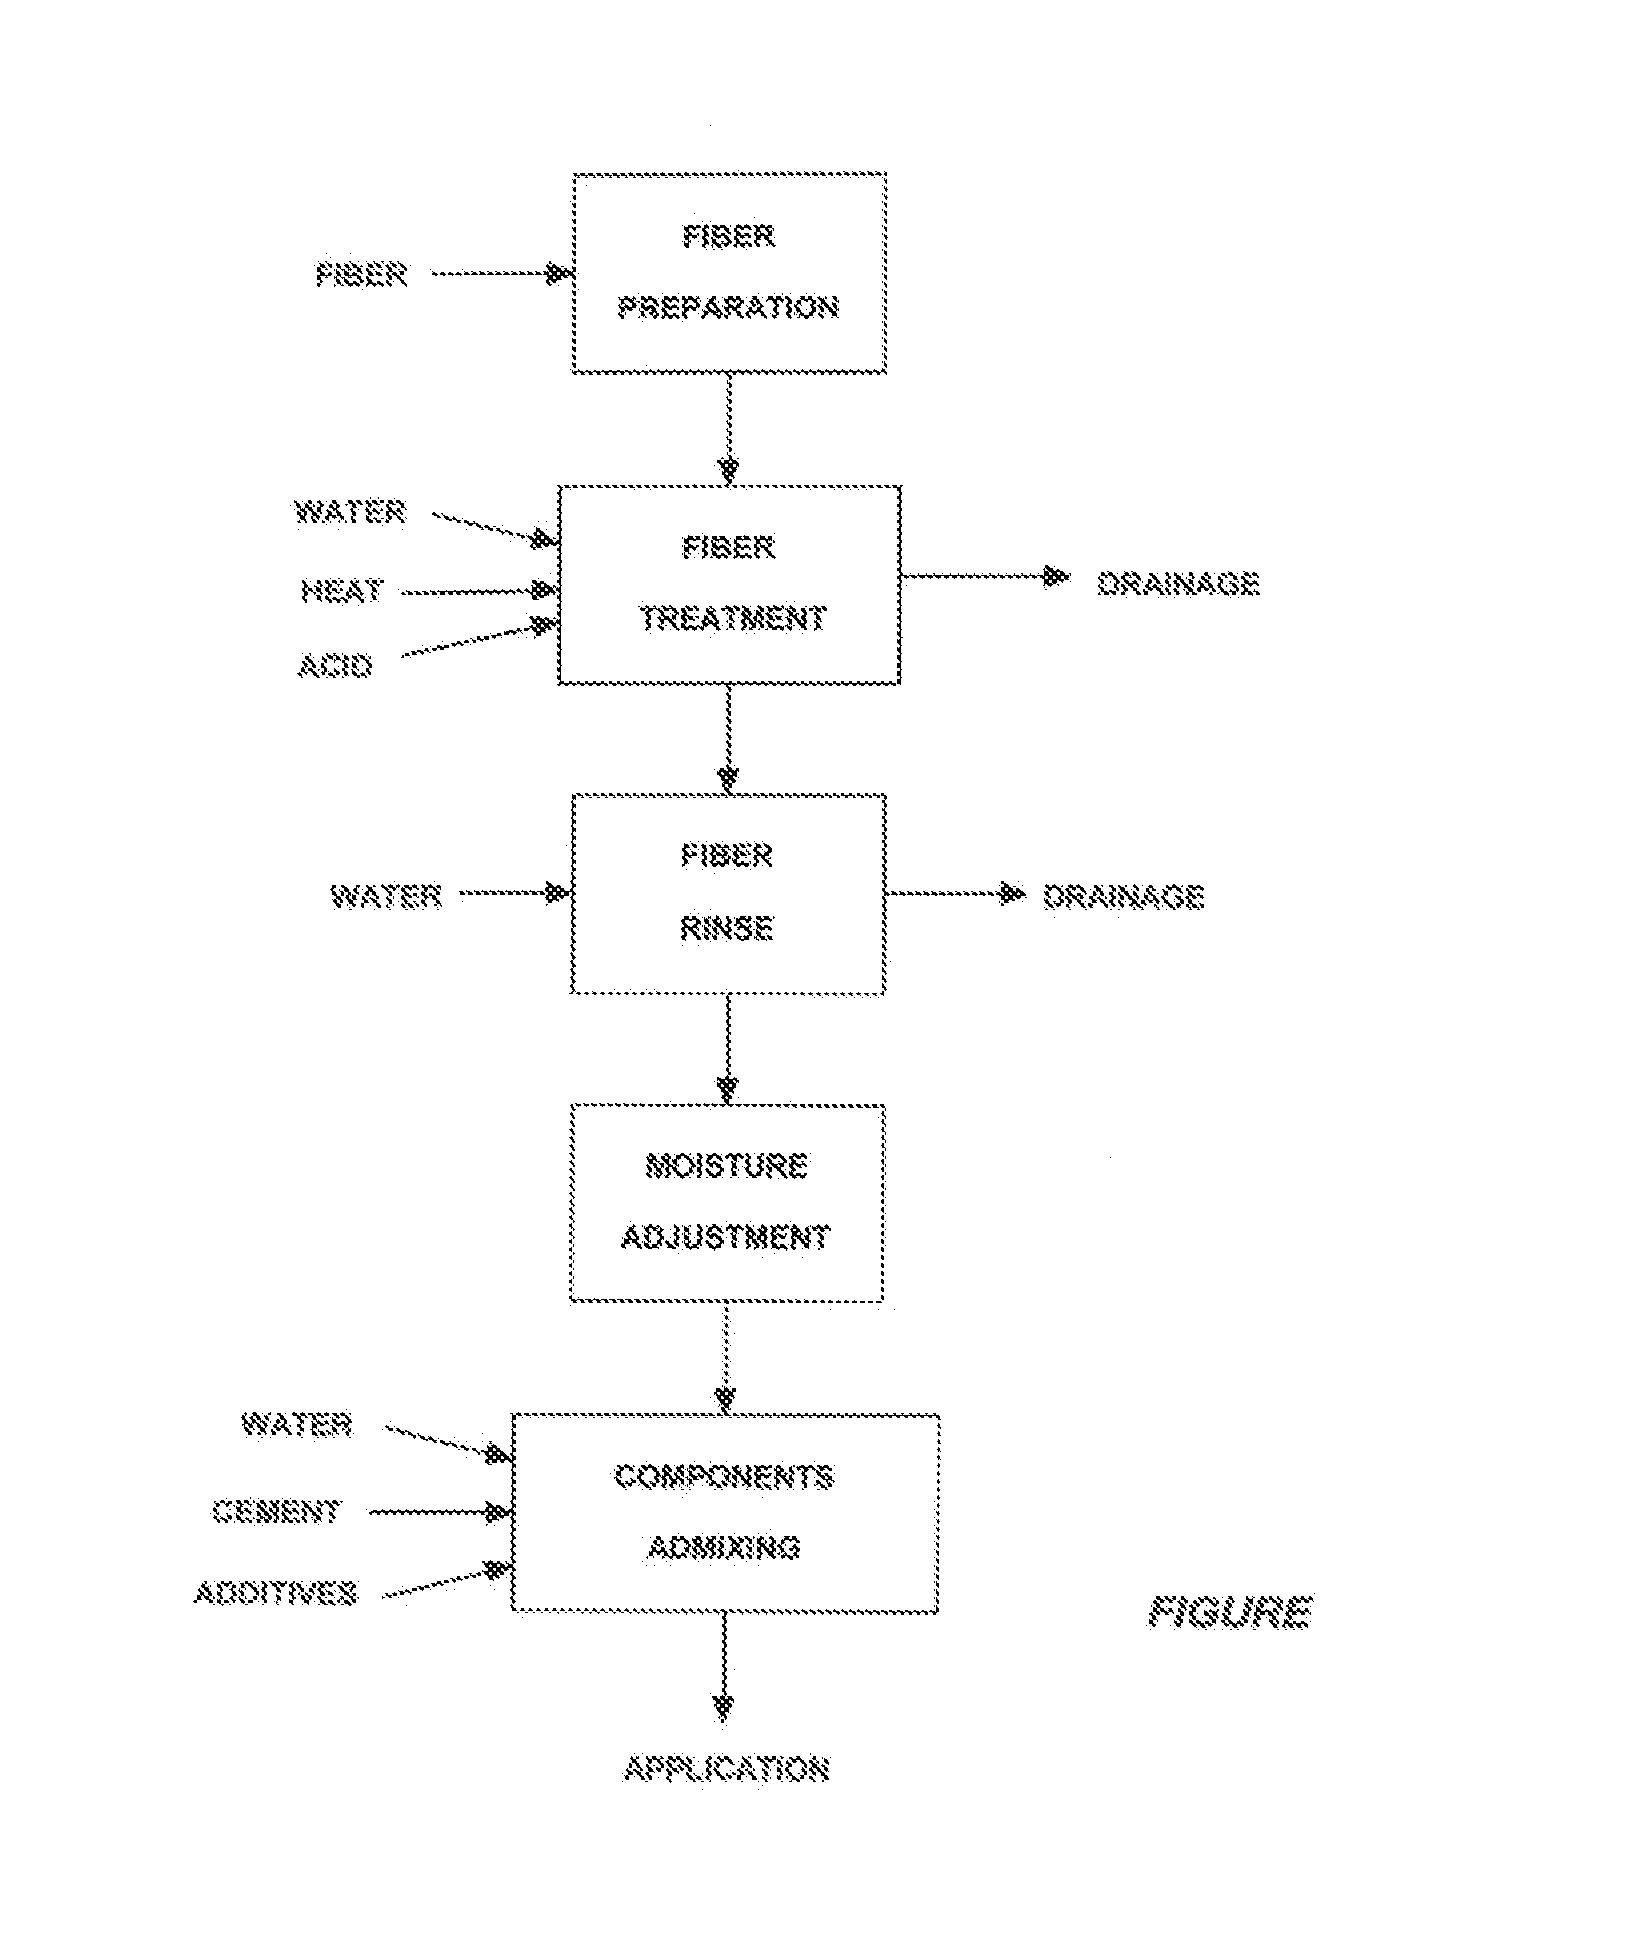 Compositions and Methods For Making of a Concrete-Like Material Containing Cellulosic Derivatives